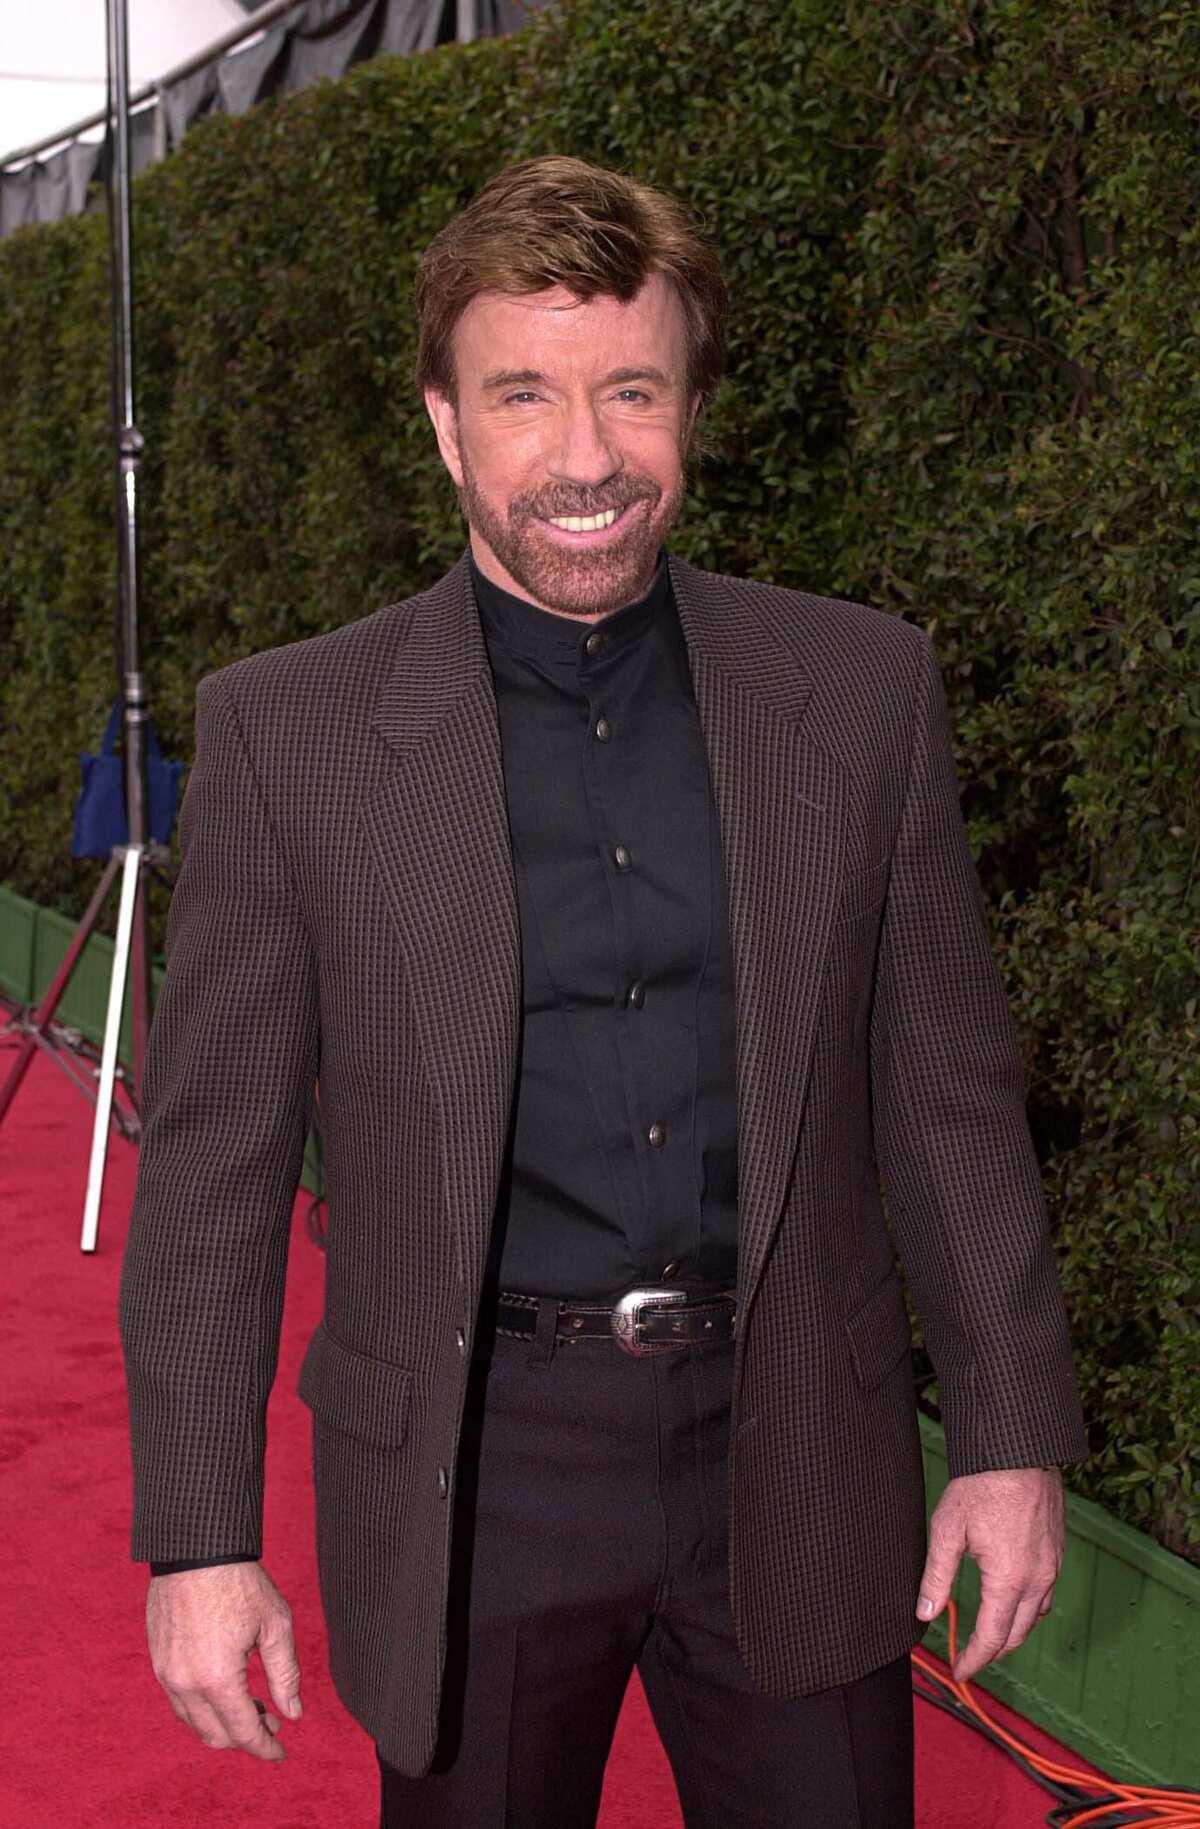 How much is Chuck Norris worth?